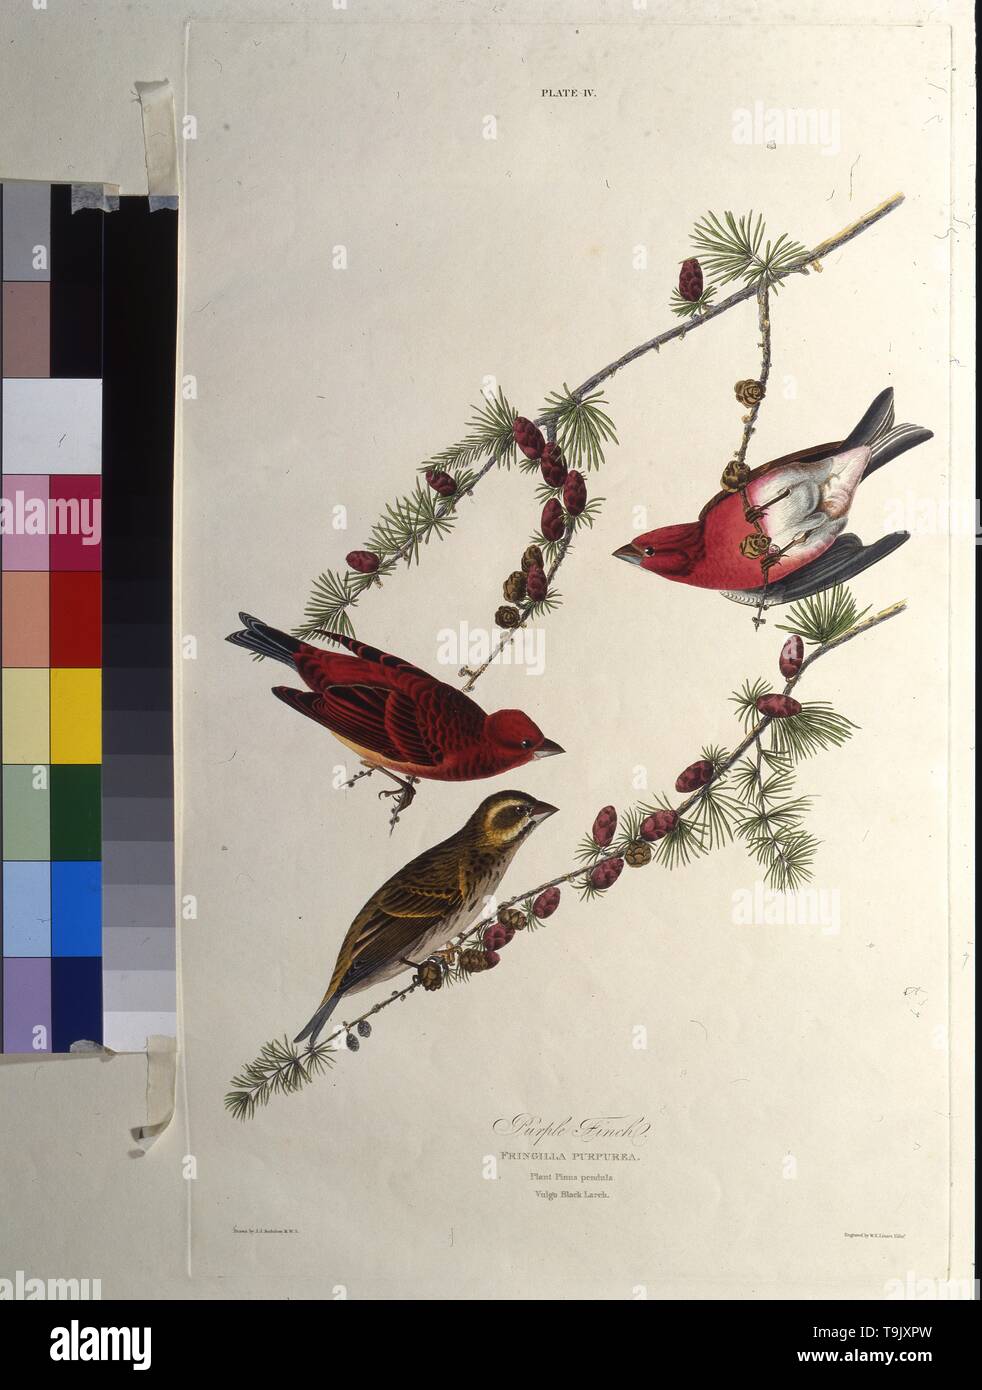 The purple finch. From 'The Birds of America'. Museum: PRIVATE COLLECTION. Author: JOHN JAMES AUDUBON. Stock Photo